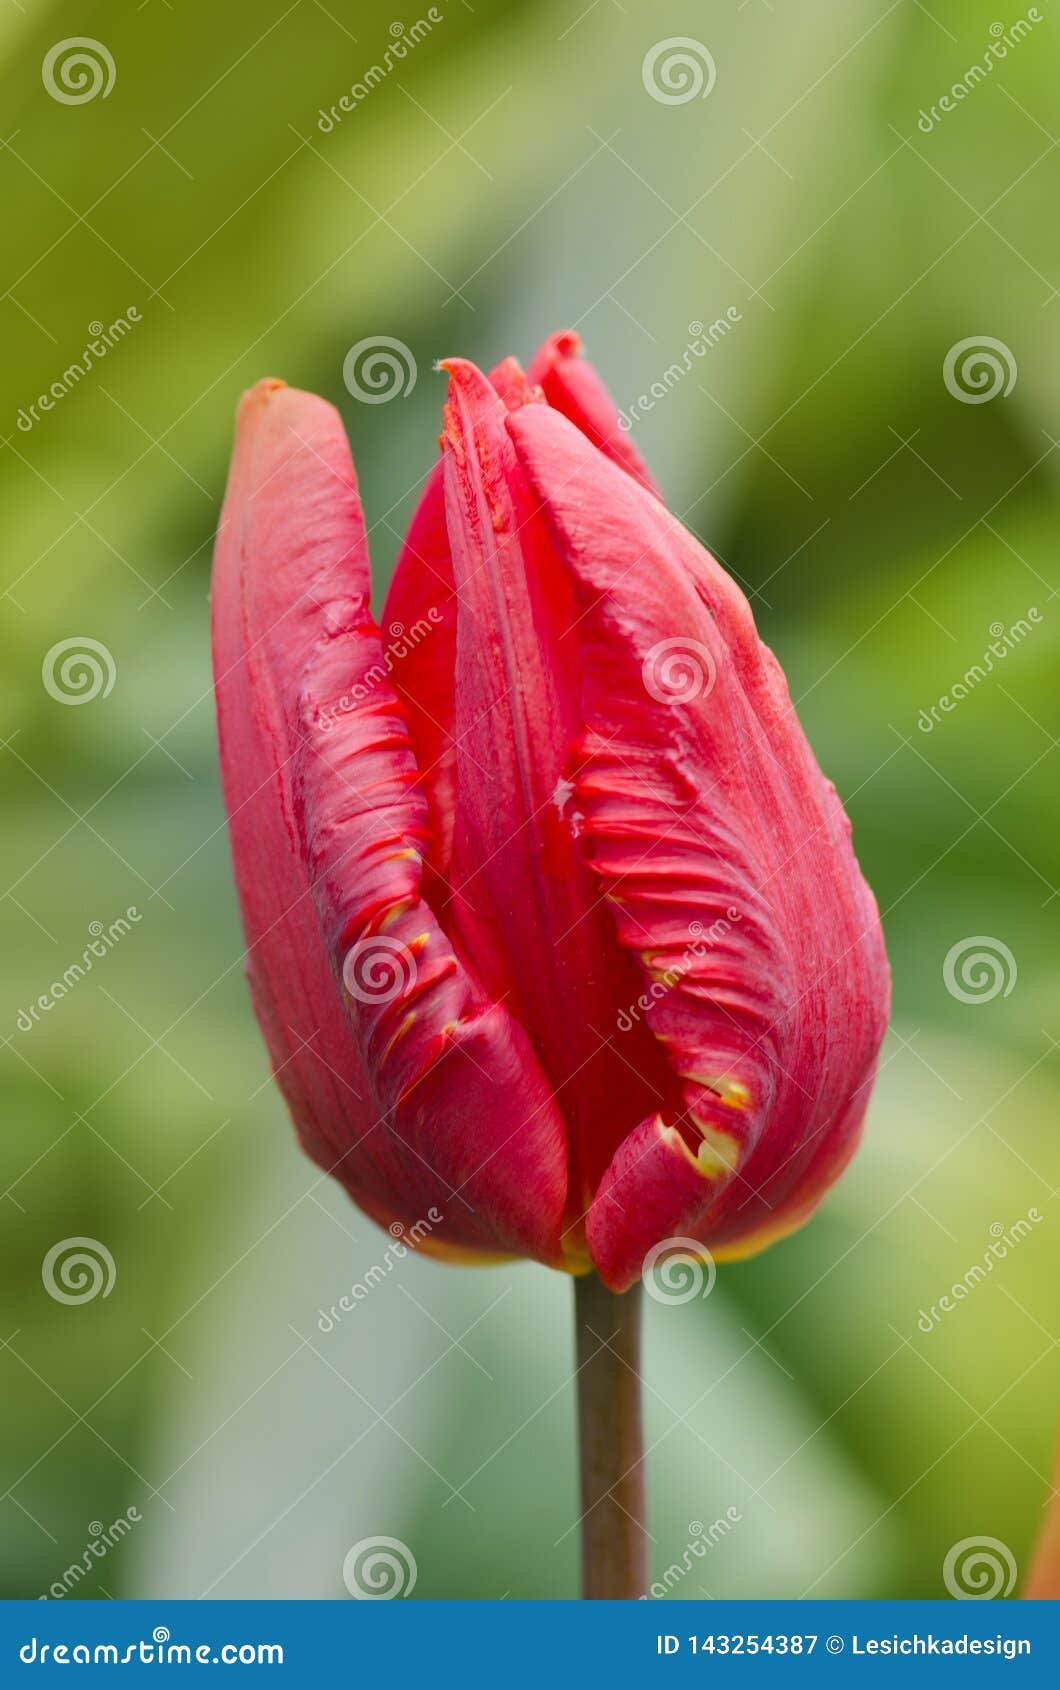 Tulipa Rococo Red Parrot Tulip Stock Image Image Of Bloom Blossom 143254387